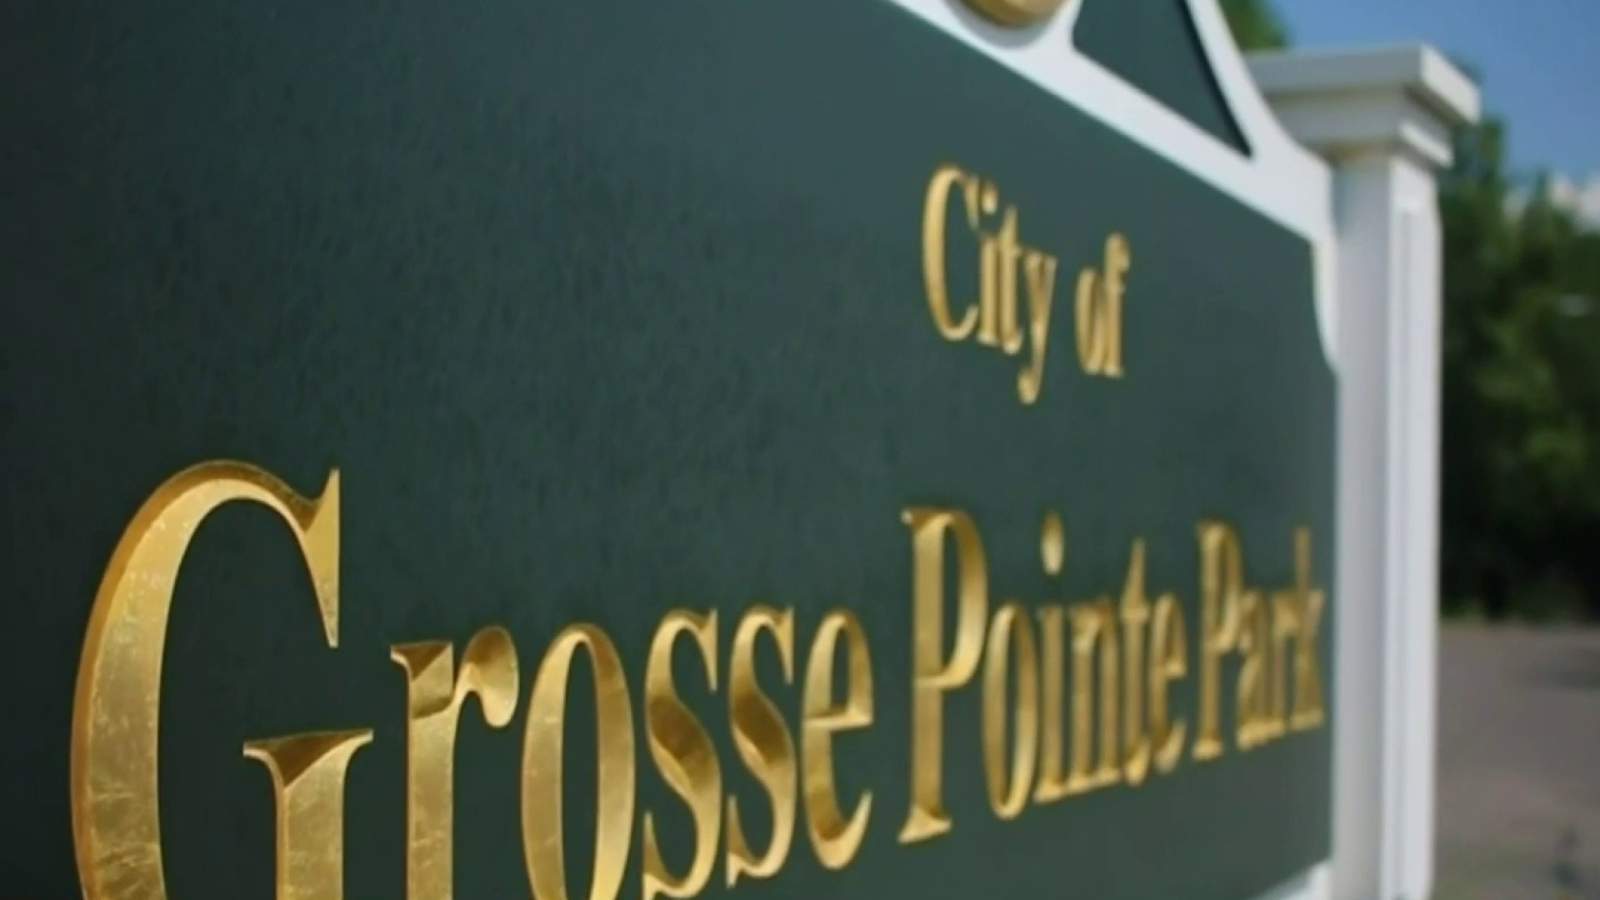 City officials concerned over rising COVID-19 cases in Grosse Pointe Park